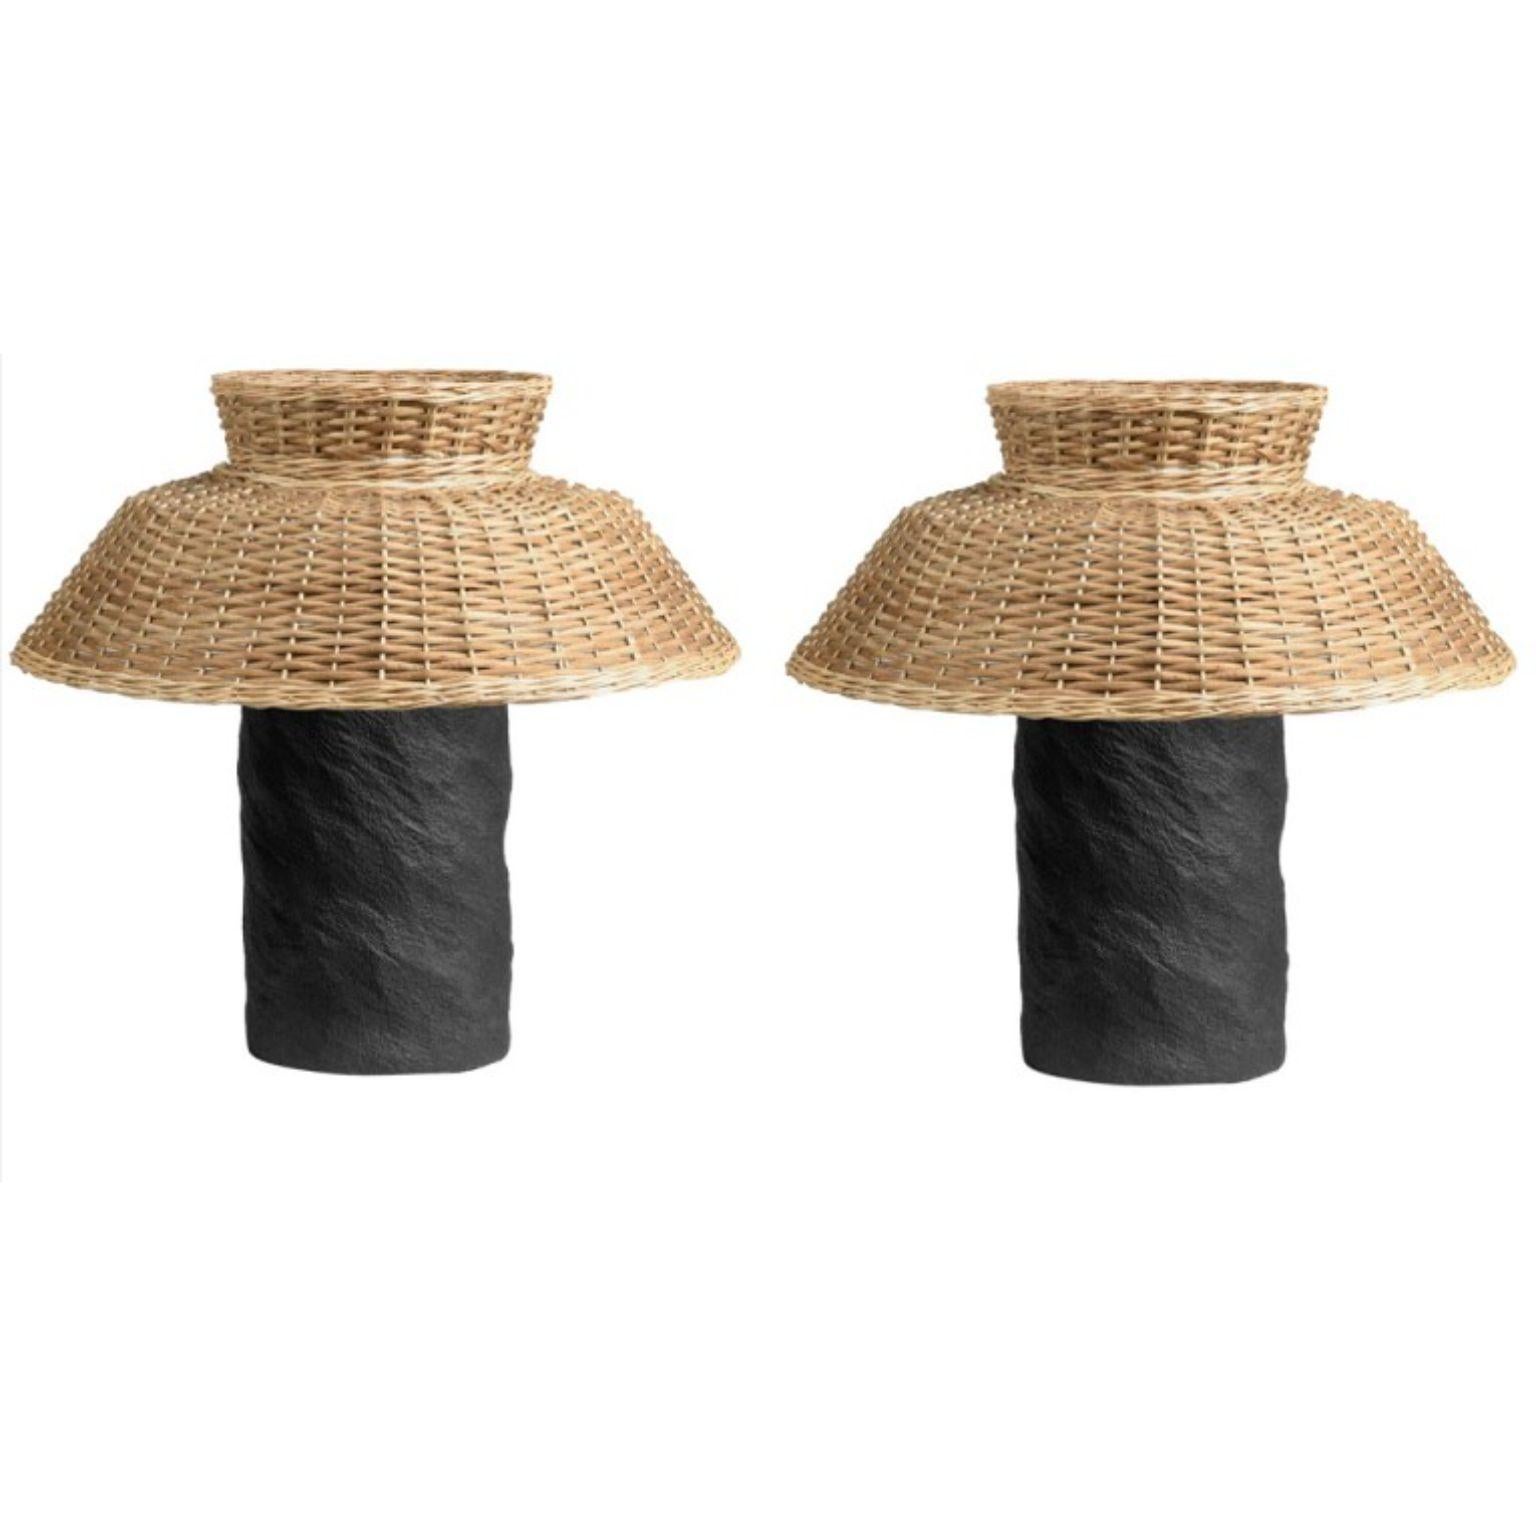 Set of 2 Willow contemporary table lamps by FAINA
Design: Victoriya Yakusha
Material: Willow, ceramics, steel frame
Dimensions: 54 x 50 cm

On/off cord switch
Non dimmable
Weight: 7 kg
1xE27, max60W

*All our lamps can be wired according